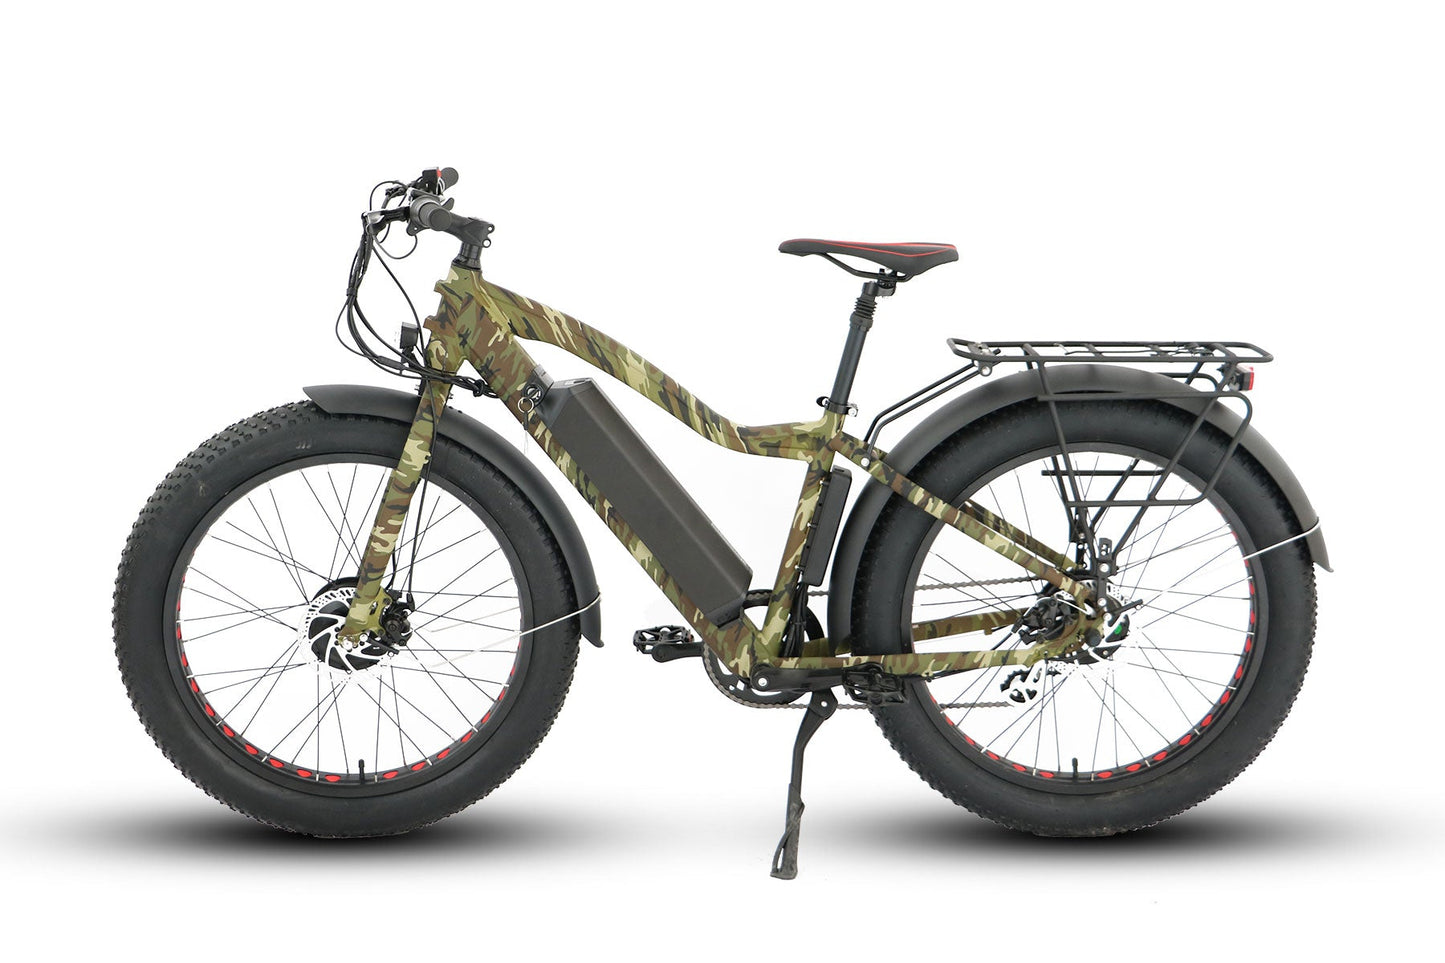 EUNORAU FAT-AWD Electric Bike with dual hub motor and fat tires. 48V/1000W motor and 48V/17.5Ah battery, as well as the high-strength aluminum alloy frame and 26 x 4-inch fat tires that provide exceptional traction and stability. The image also displays the Shimano 7-speed transmission system and hydraulic disc brakes, which provide powerful stopping power. Additionally, the integrated LED headlight and taillight of the EUNORAU FAT-AWD Electric Bike ensure visibility in low-light conditions.